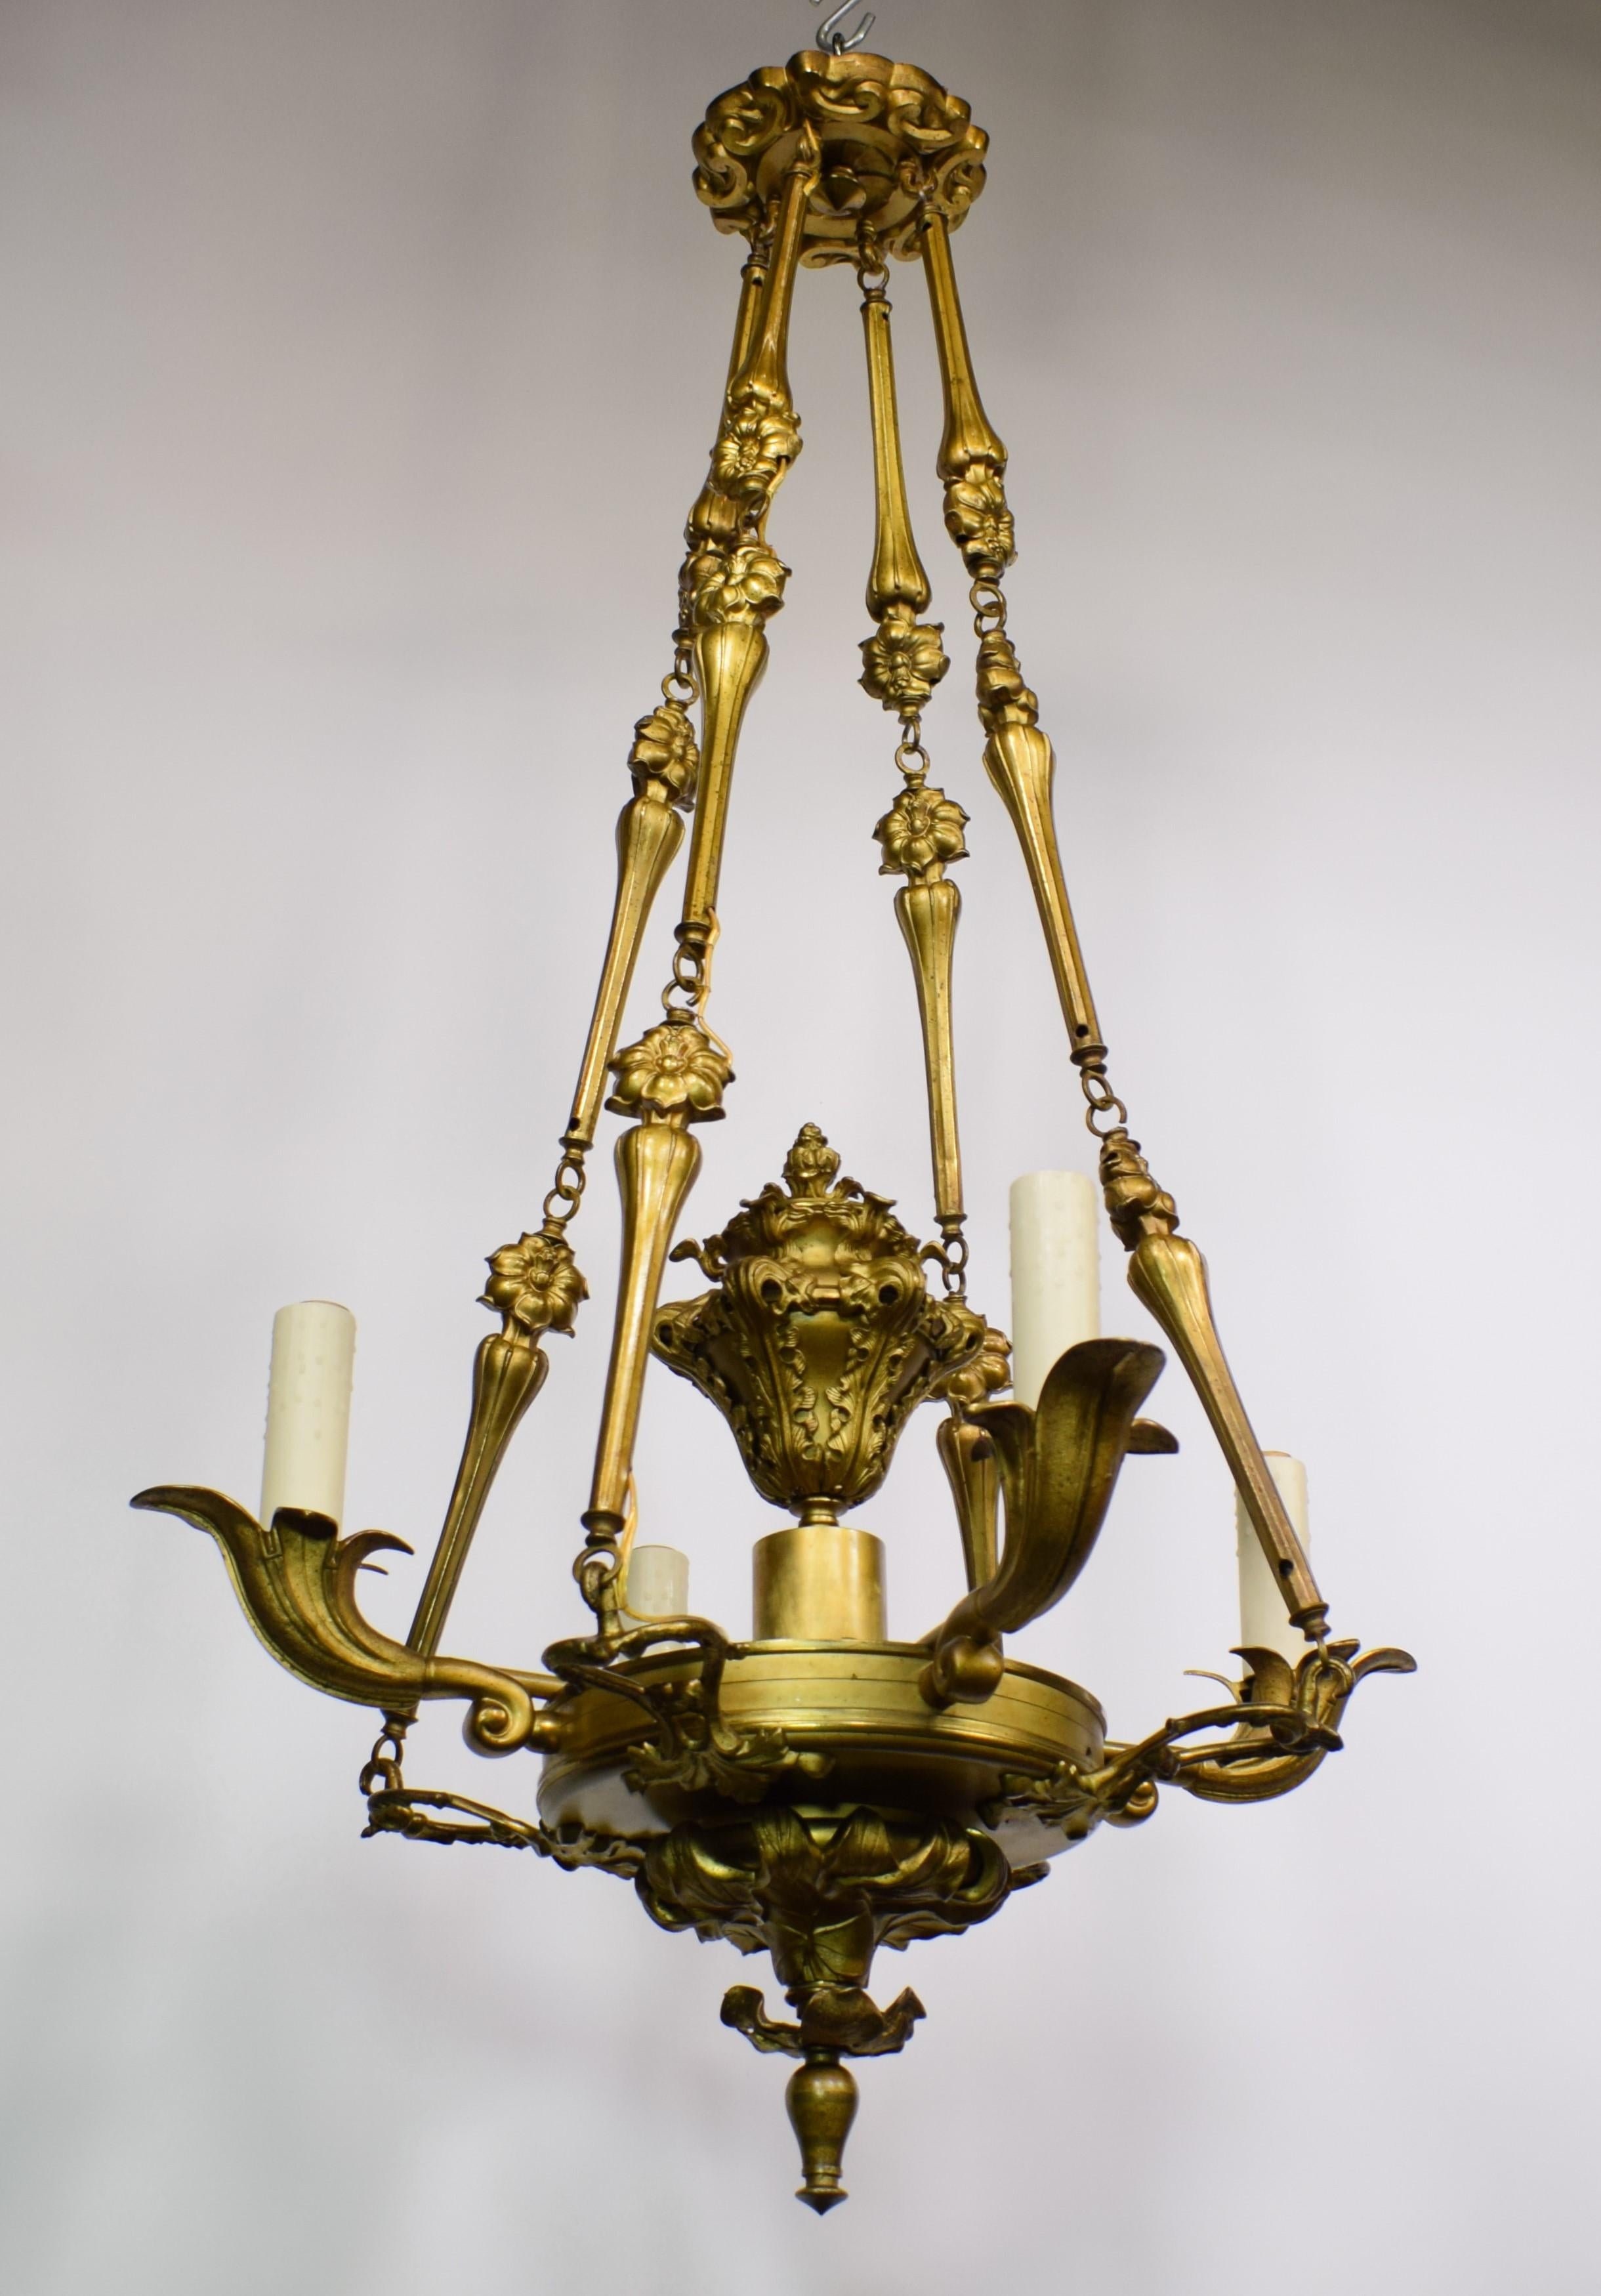 Superb Art Nouveau Gilt Bronze Chandelier. The ornamentation (incorporating leaves and other floral elements) makes this a wonderful example of early Art Nouveau. France, circa 190. 5 lights.
Dimensions: H: 53.5